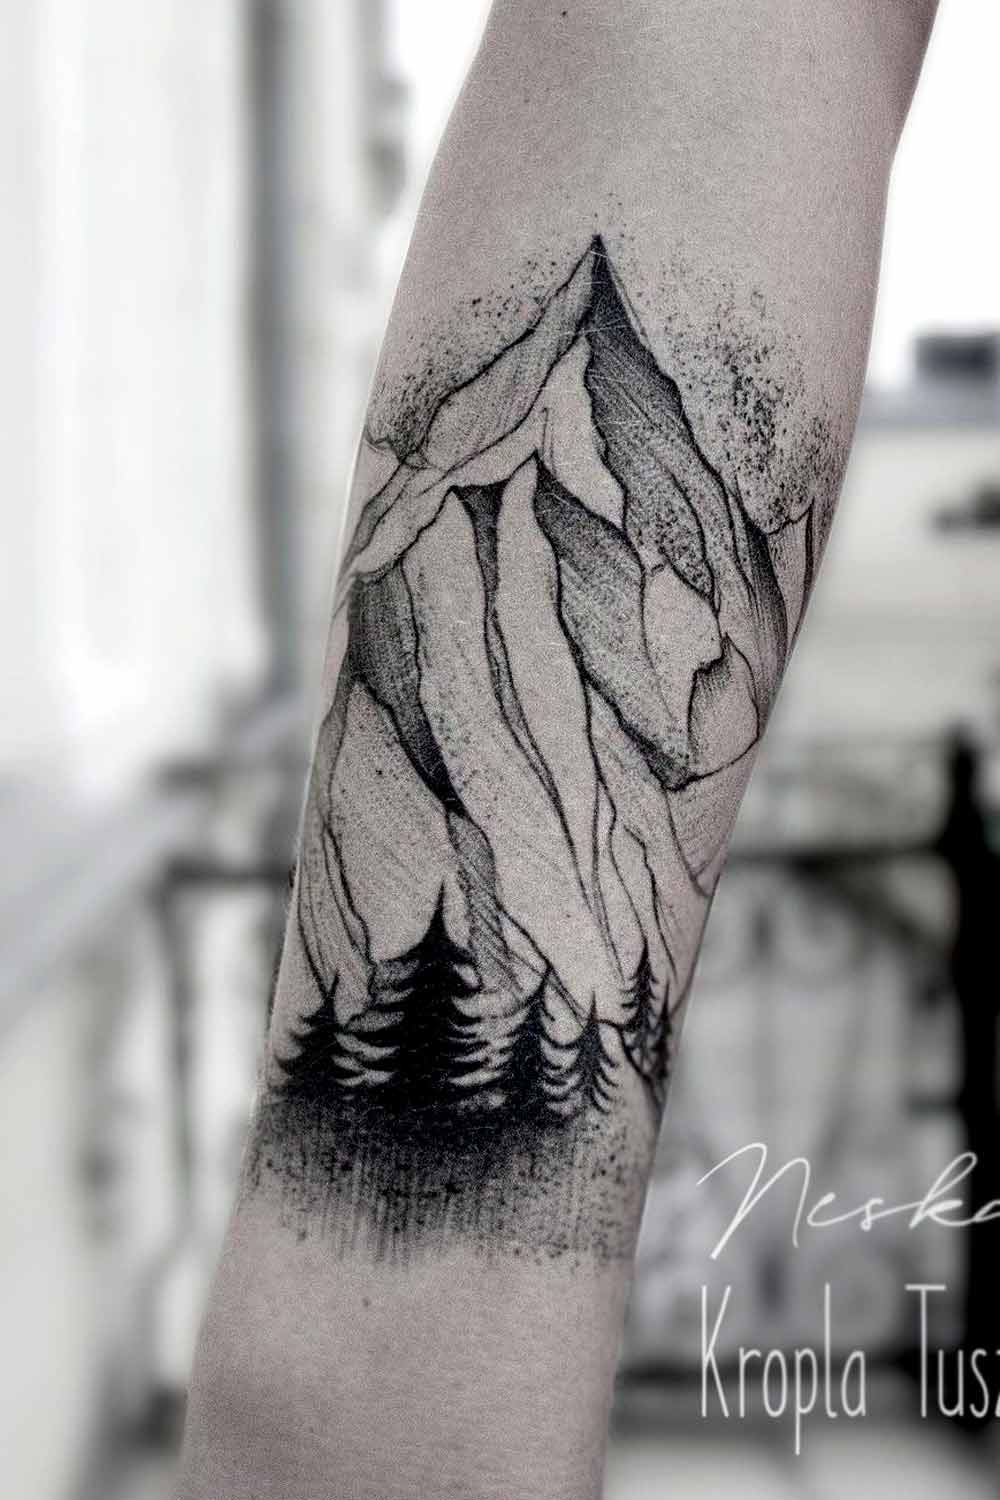 14 Female Meaningful Forearm Tattoos That Will Make You Stand Out  Blush